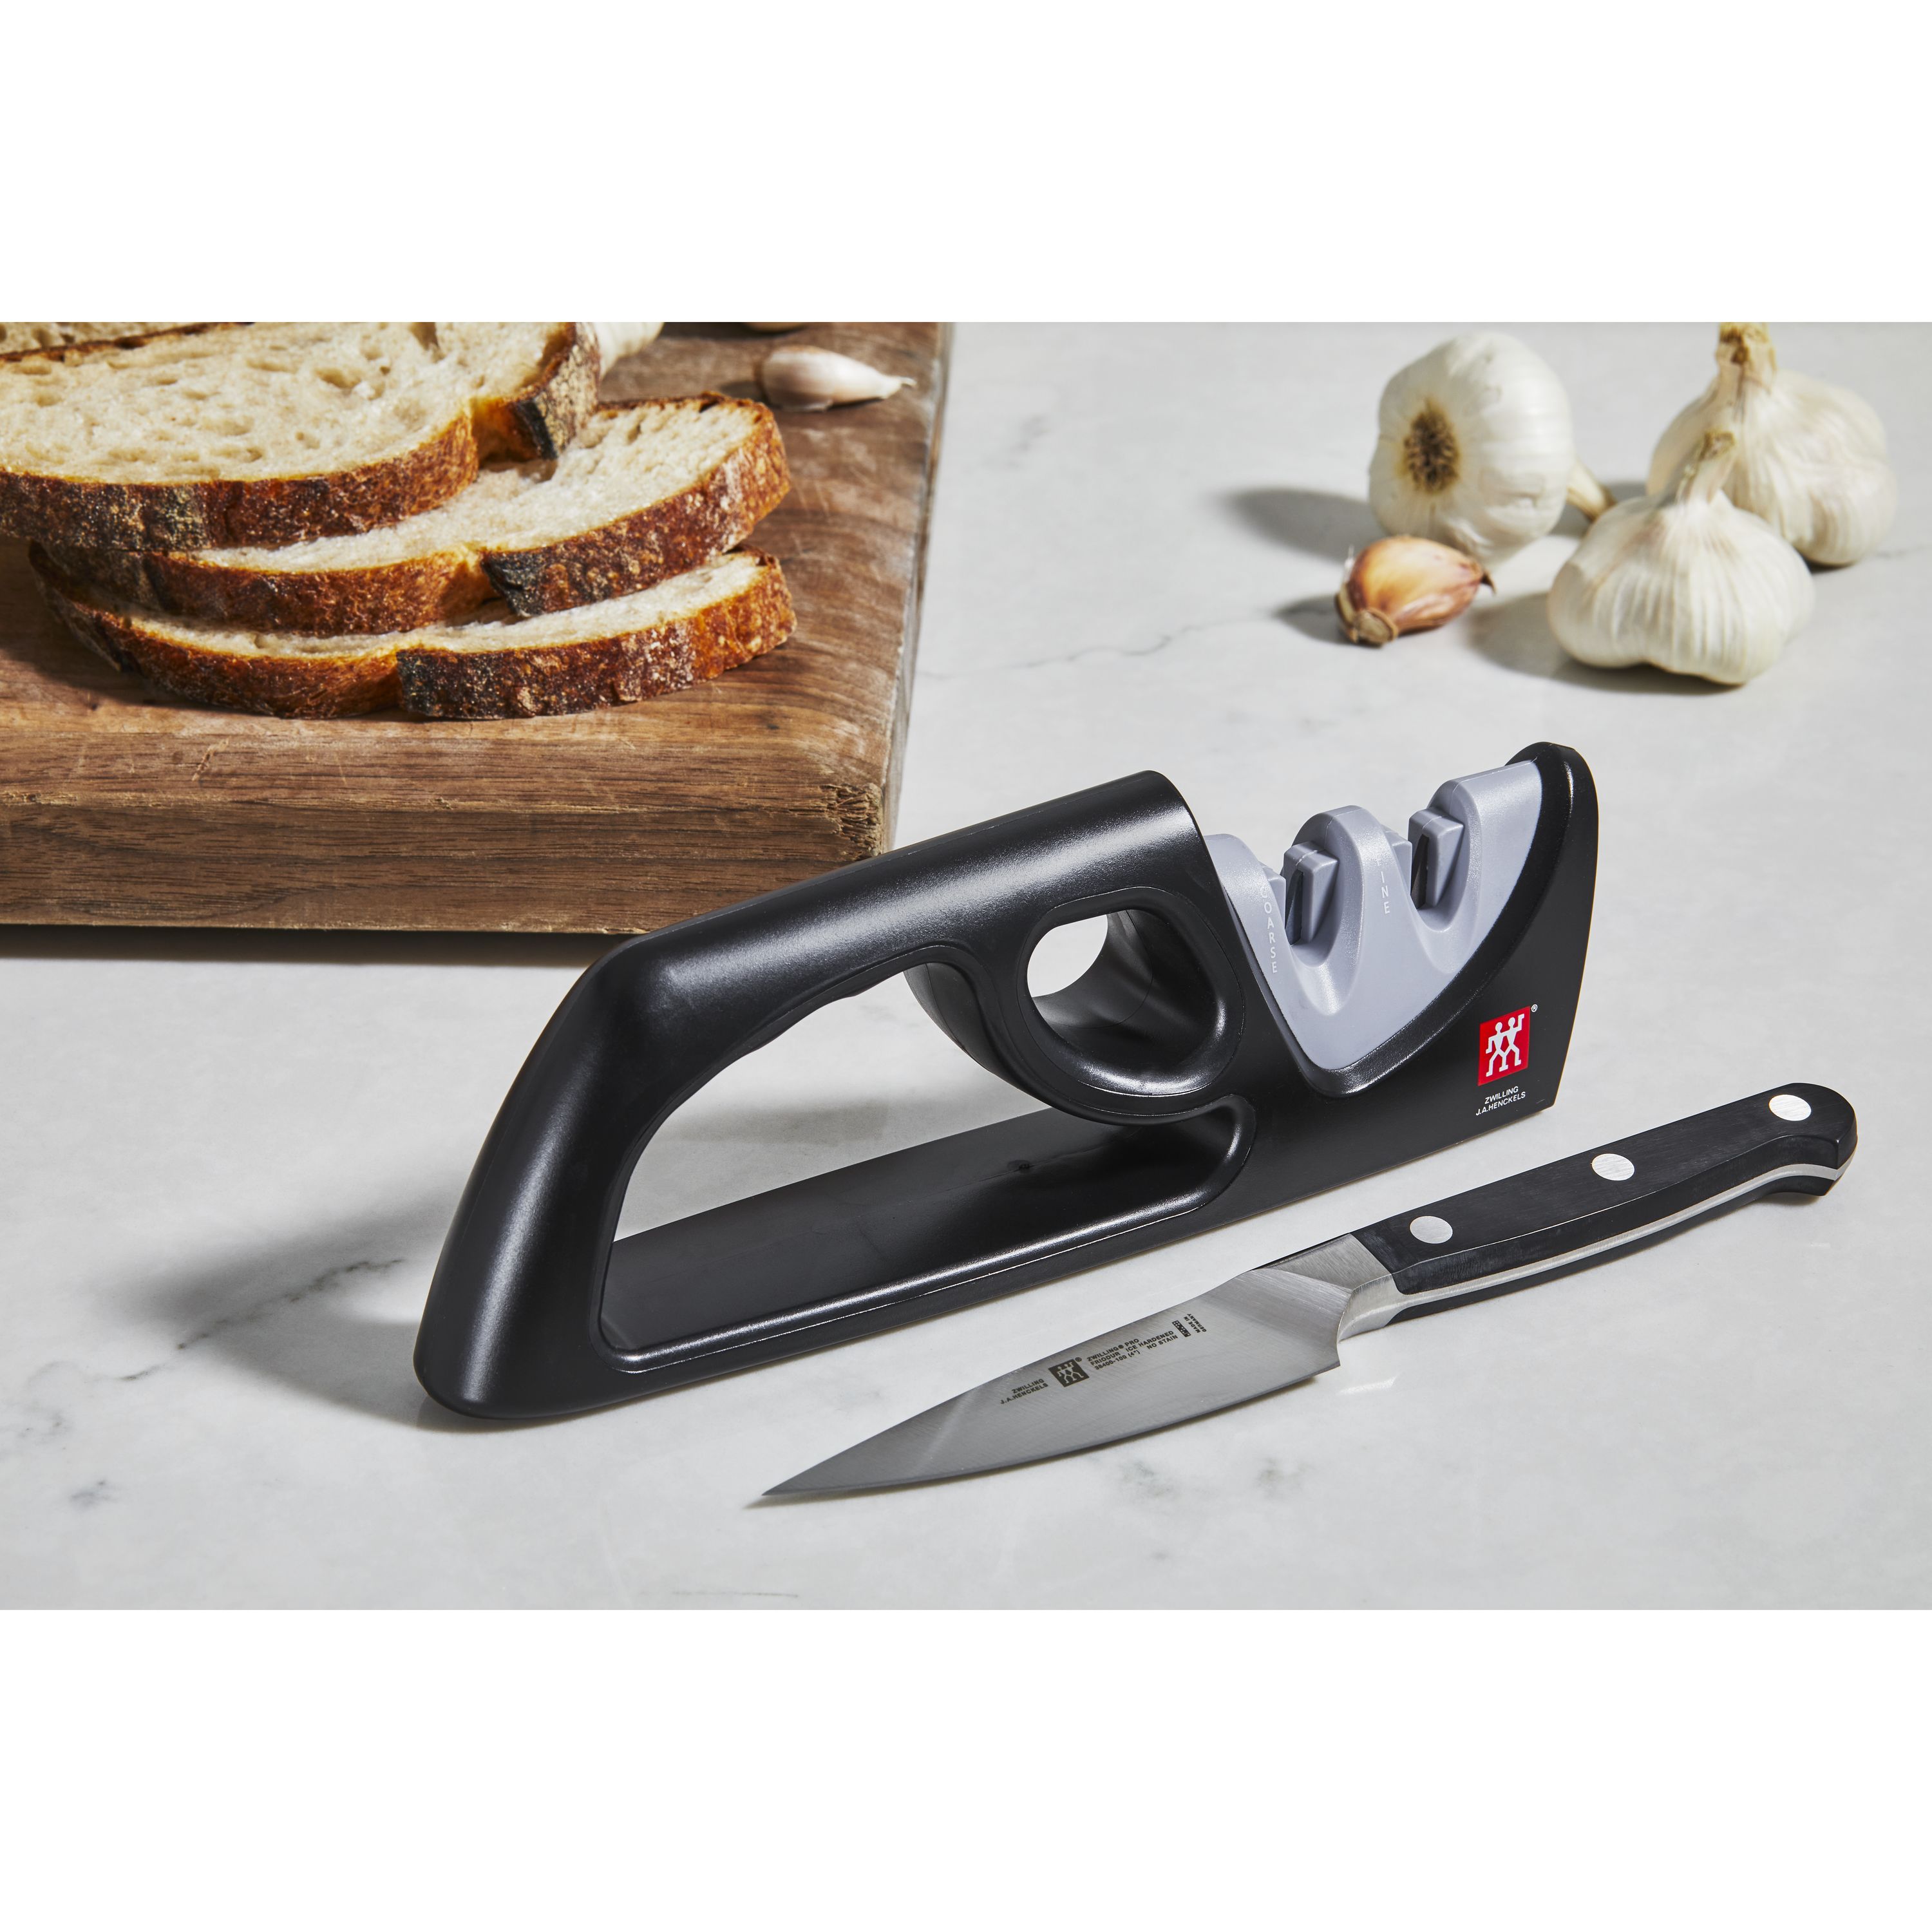 Zwilling J.A. Henckels 2-Stage Pull-Through Knife Sharpener - KnifeCenter -  32603-301 - Discontinued